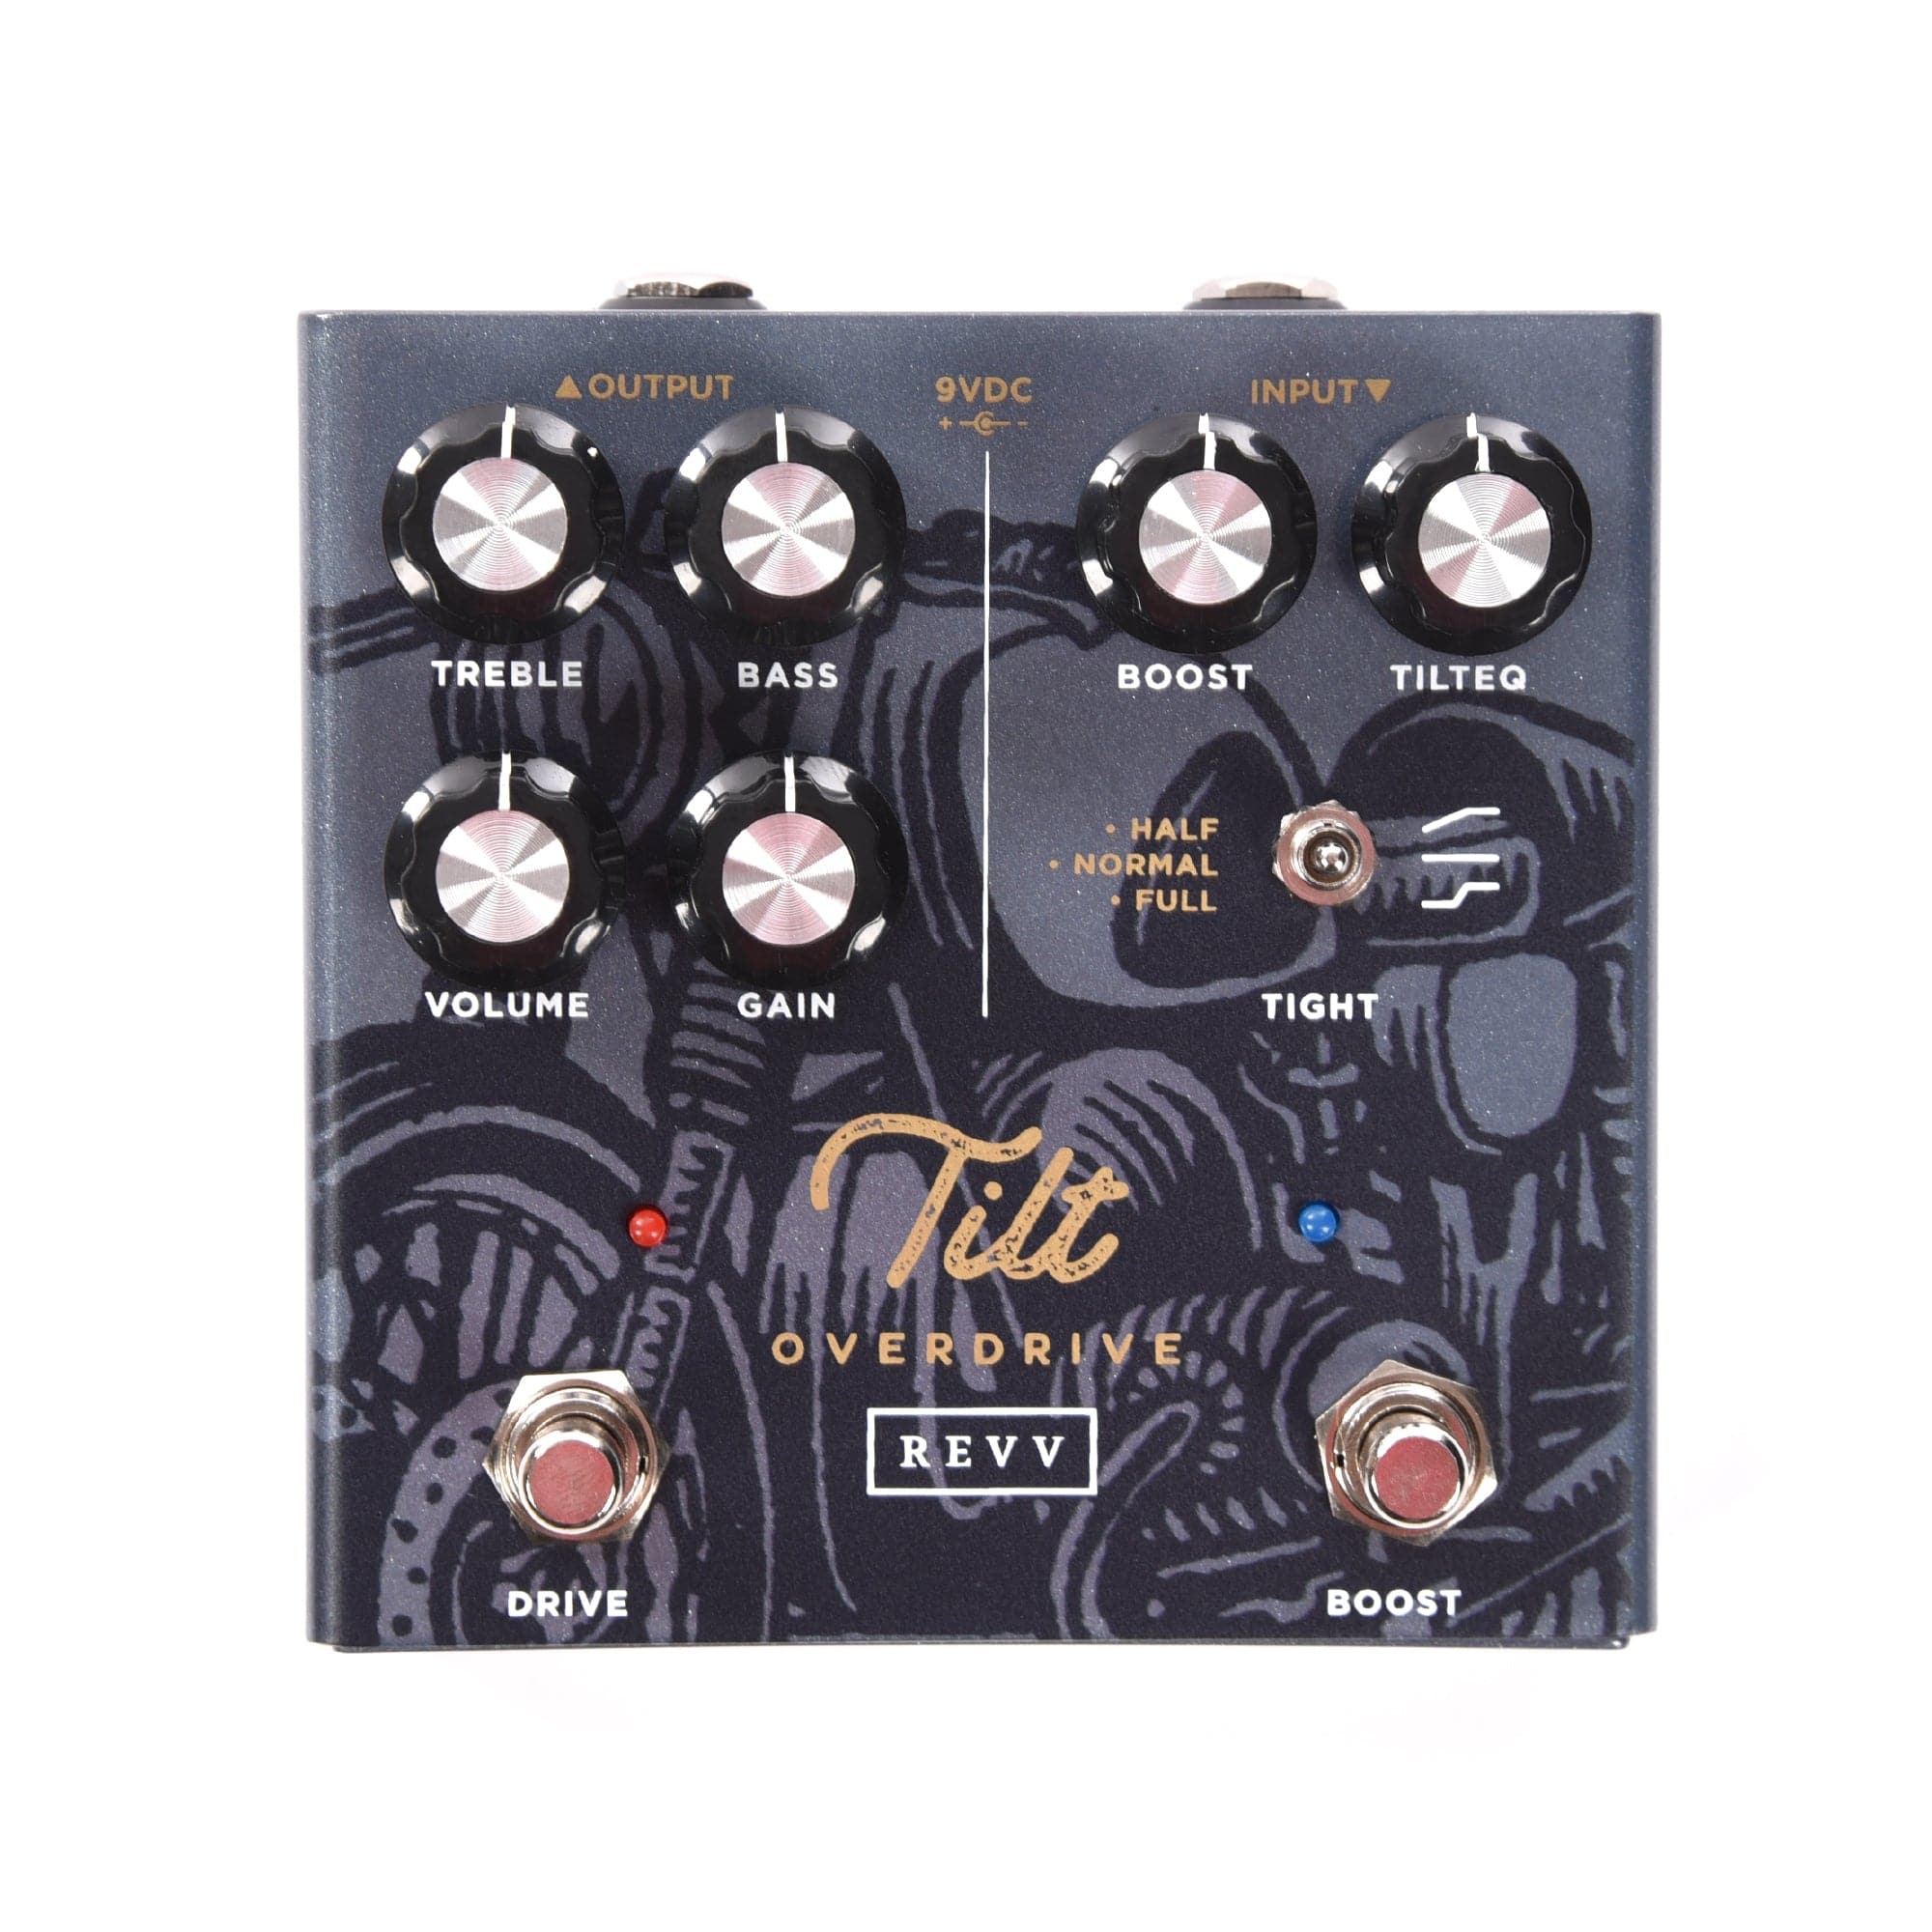 Revv Shawn Tubbs Signature Tilt Overdrive/Boost Pedal Effects and Pedals / Overdrive and Boost